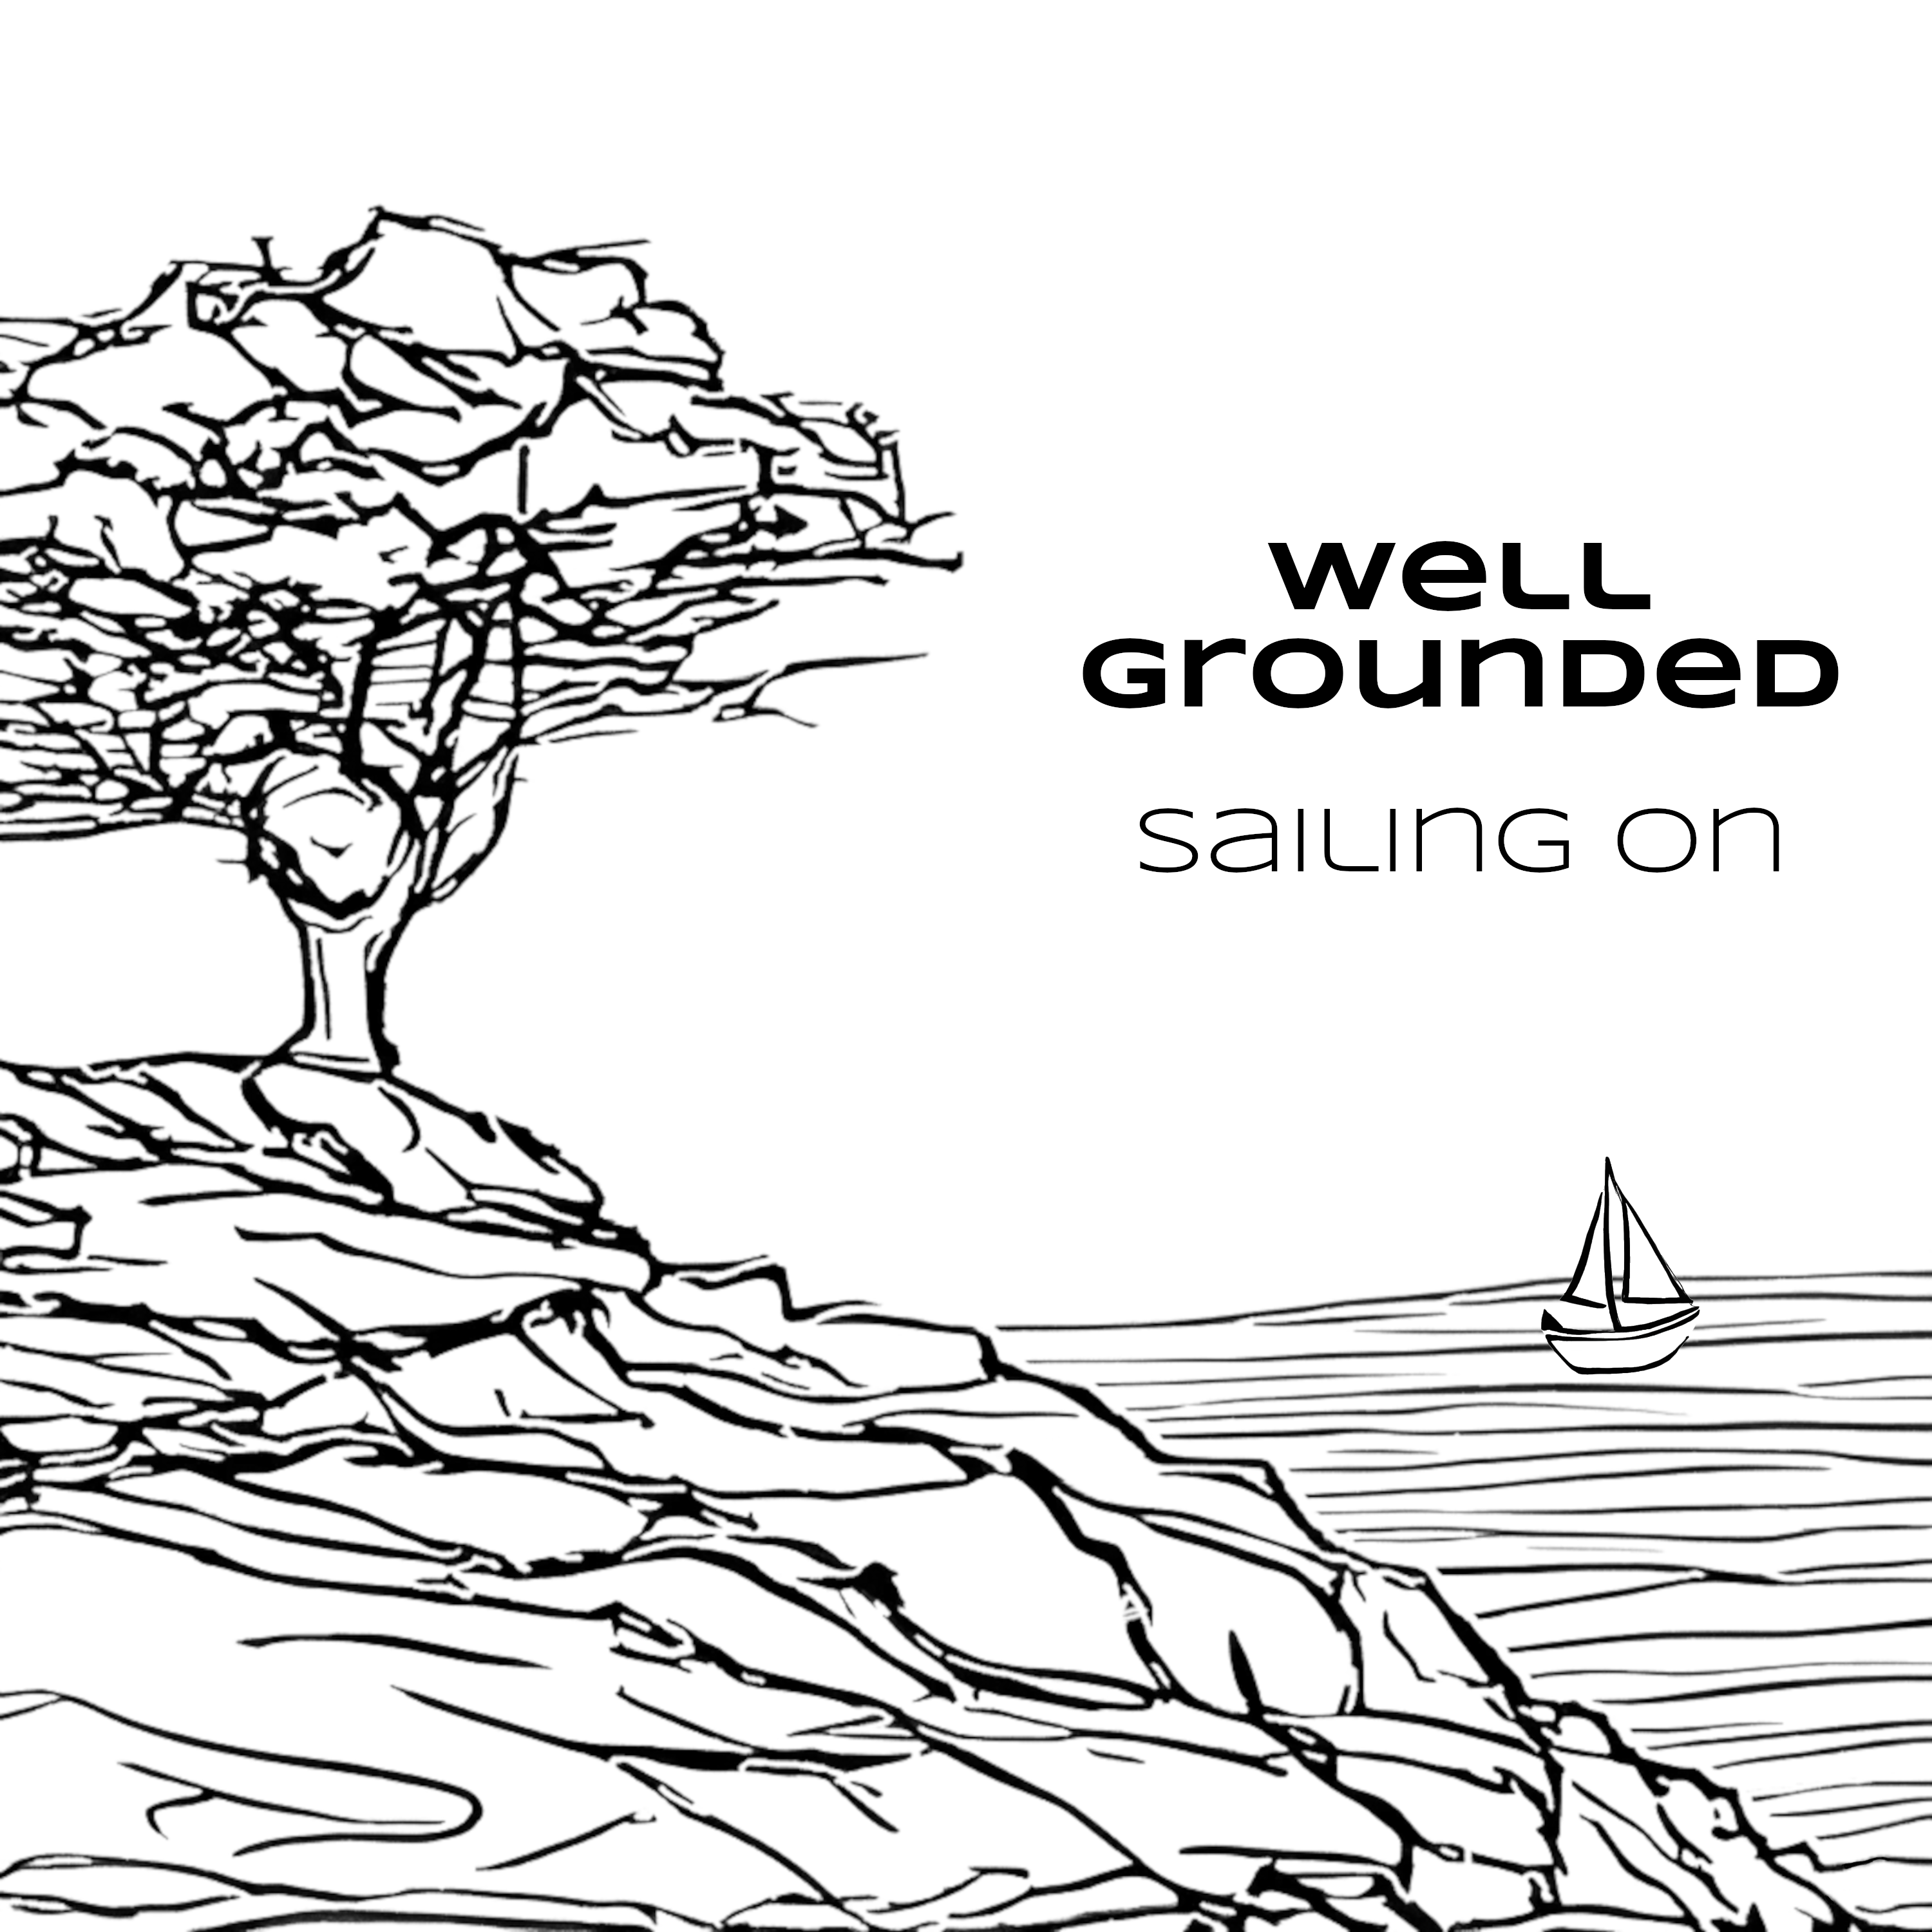 Cover art for 'Sailing On' by Well Grounded, a modern reggae song about grief and hope